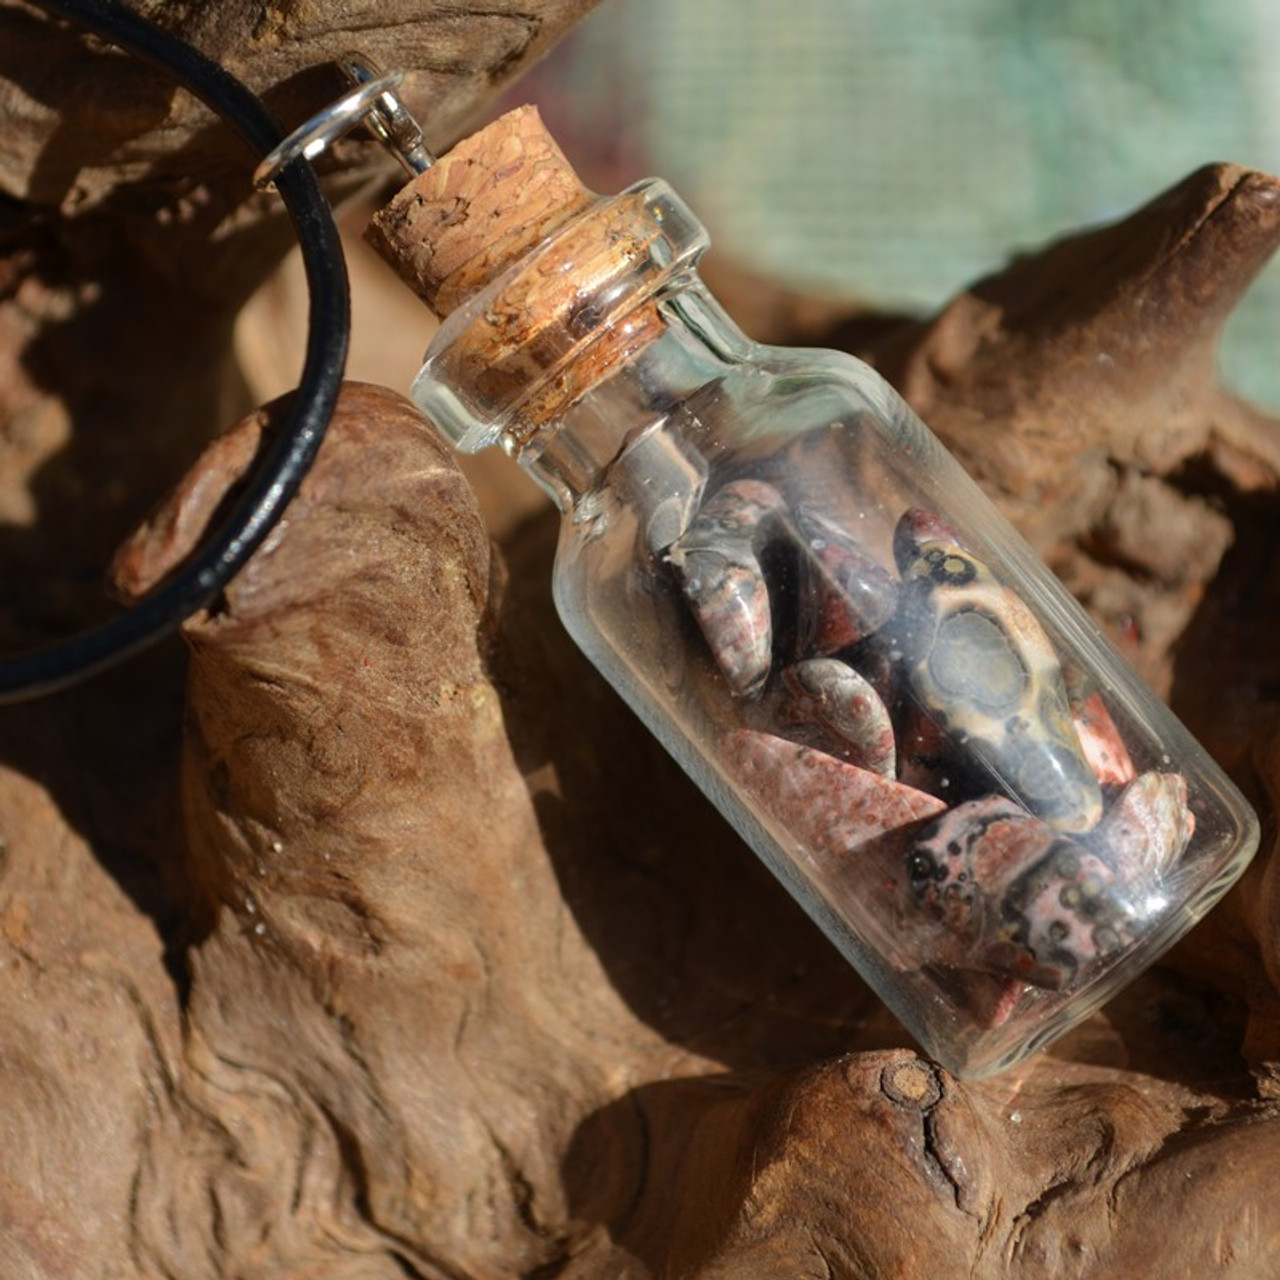 Leopard Skin Jasper Stones in a Glass Vial on a Leather Cord Necklace